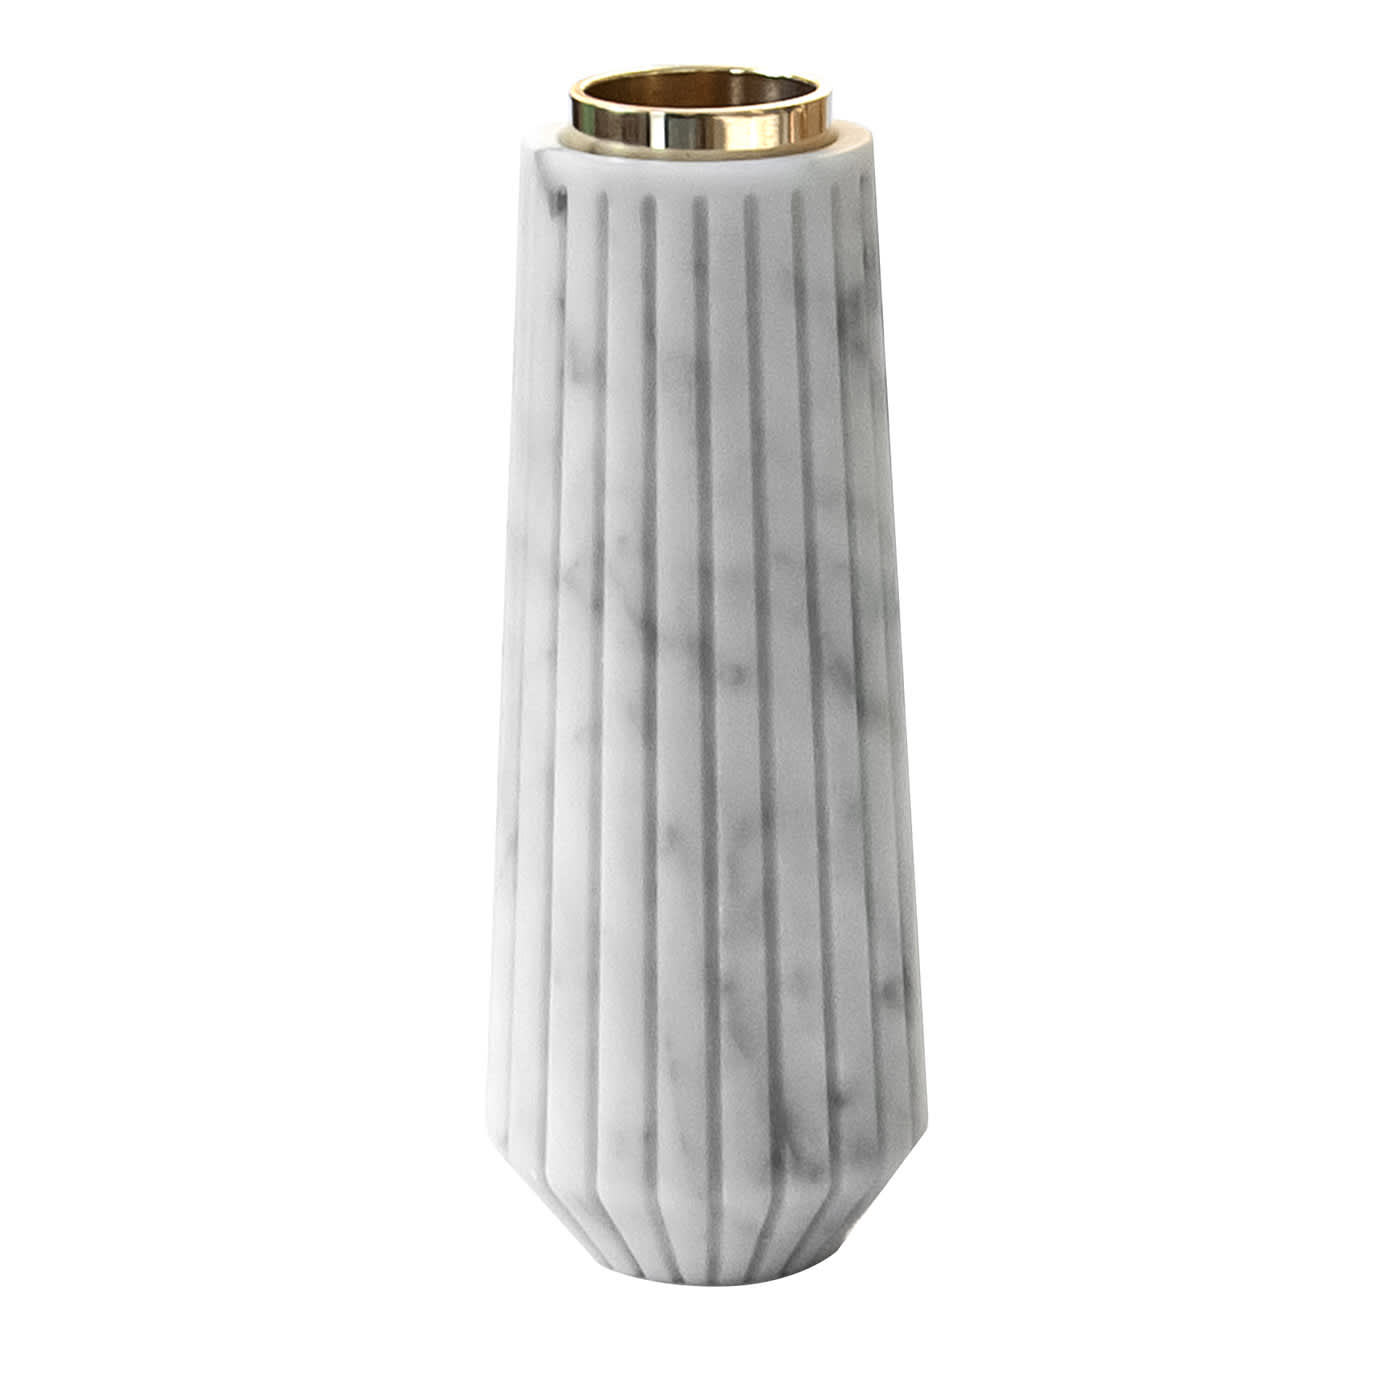 Striped Candle Holder #1 - FiammettaV Home Collection